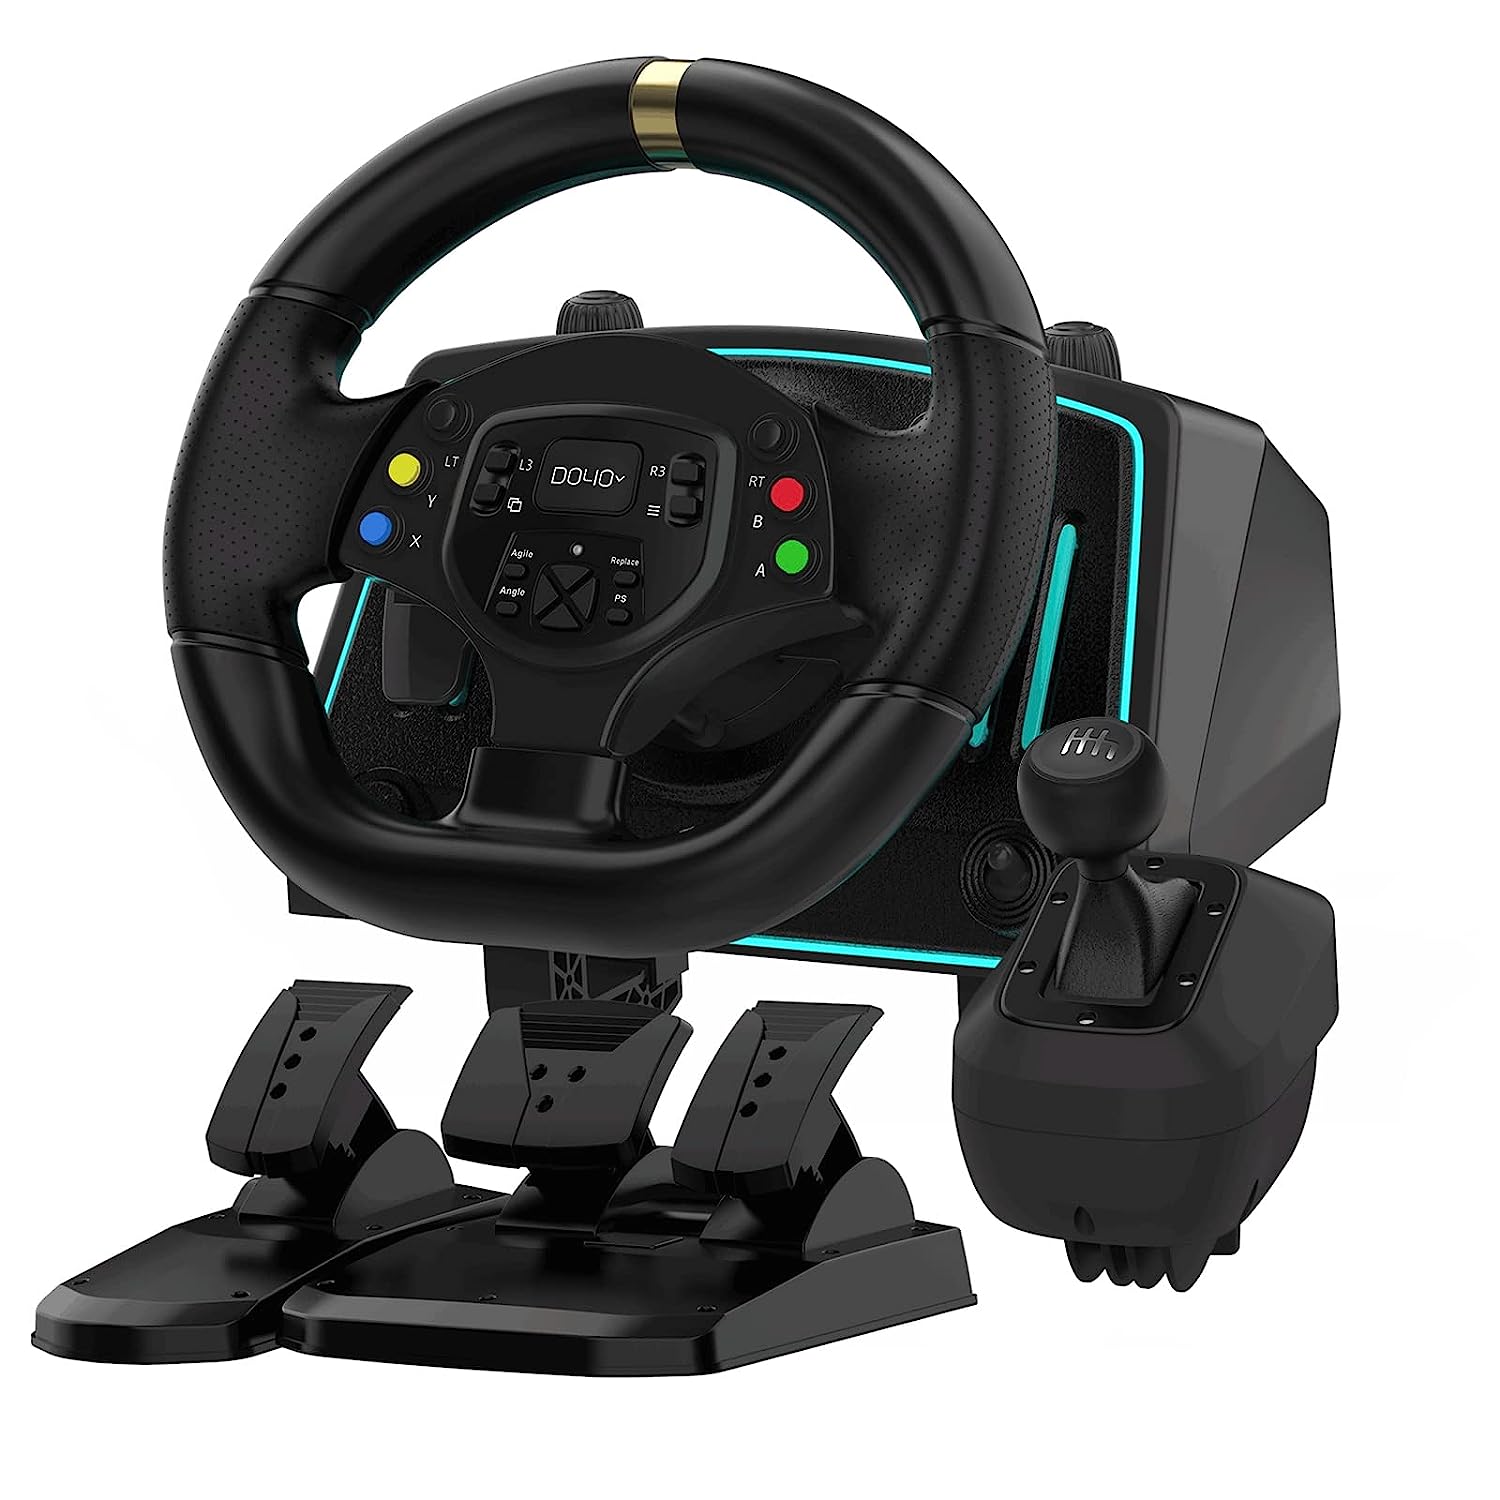 NBCP Doyo Gaming Steering Wheel 1080 Driving Sim Controller W Pedals Black